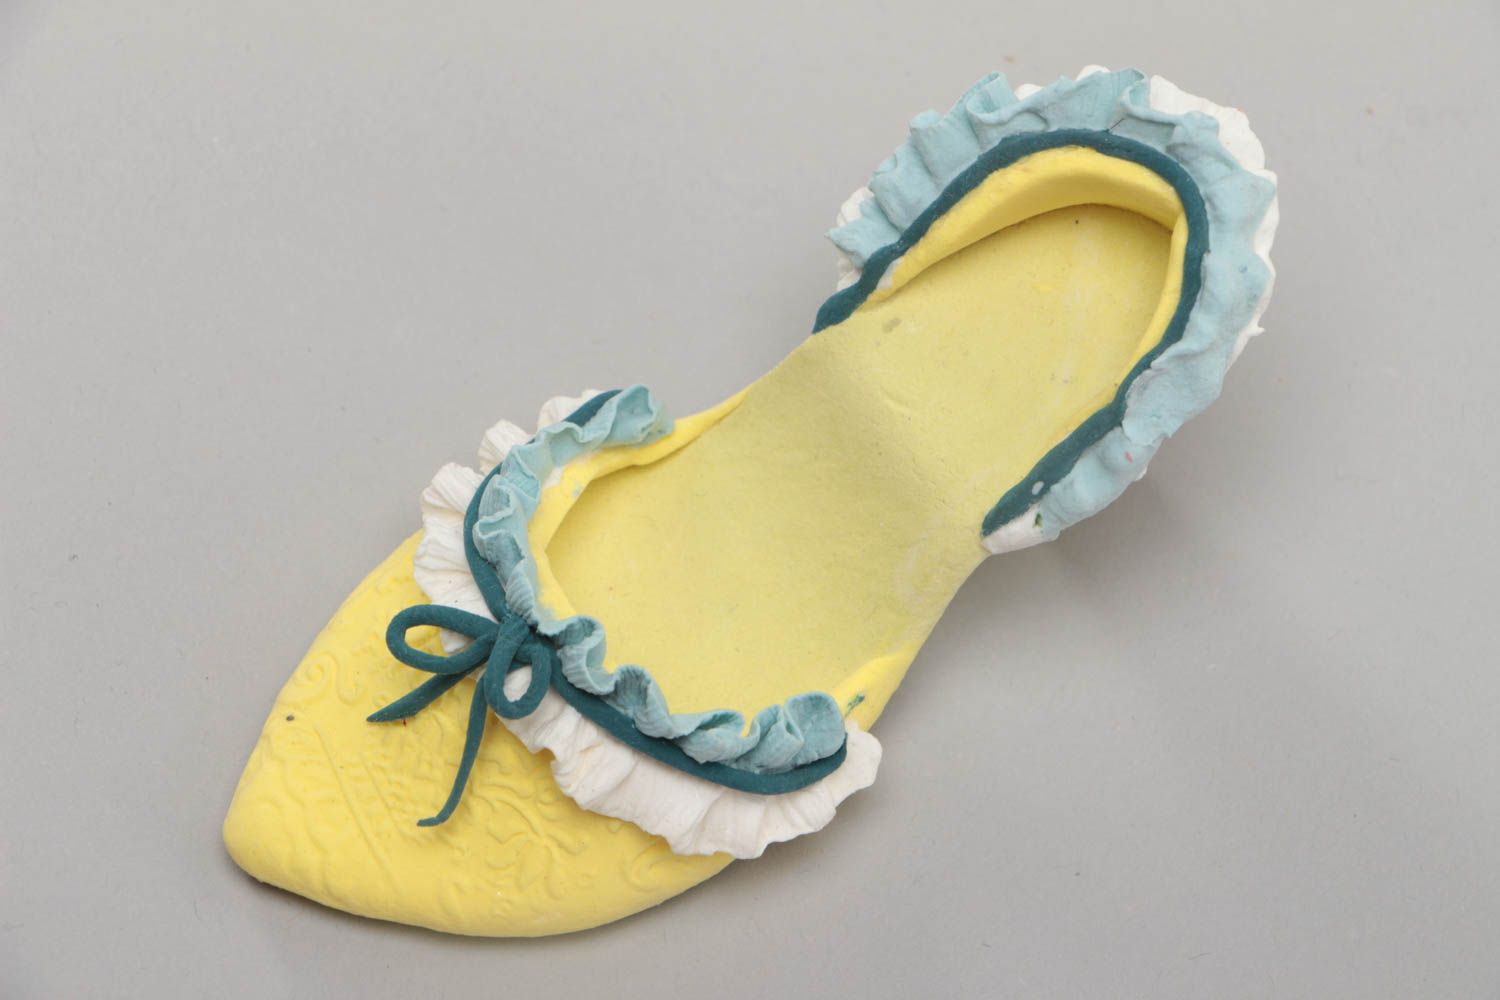 Handmade decorative polymer clay figurine of yellow and blue shoe for interior photo 2